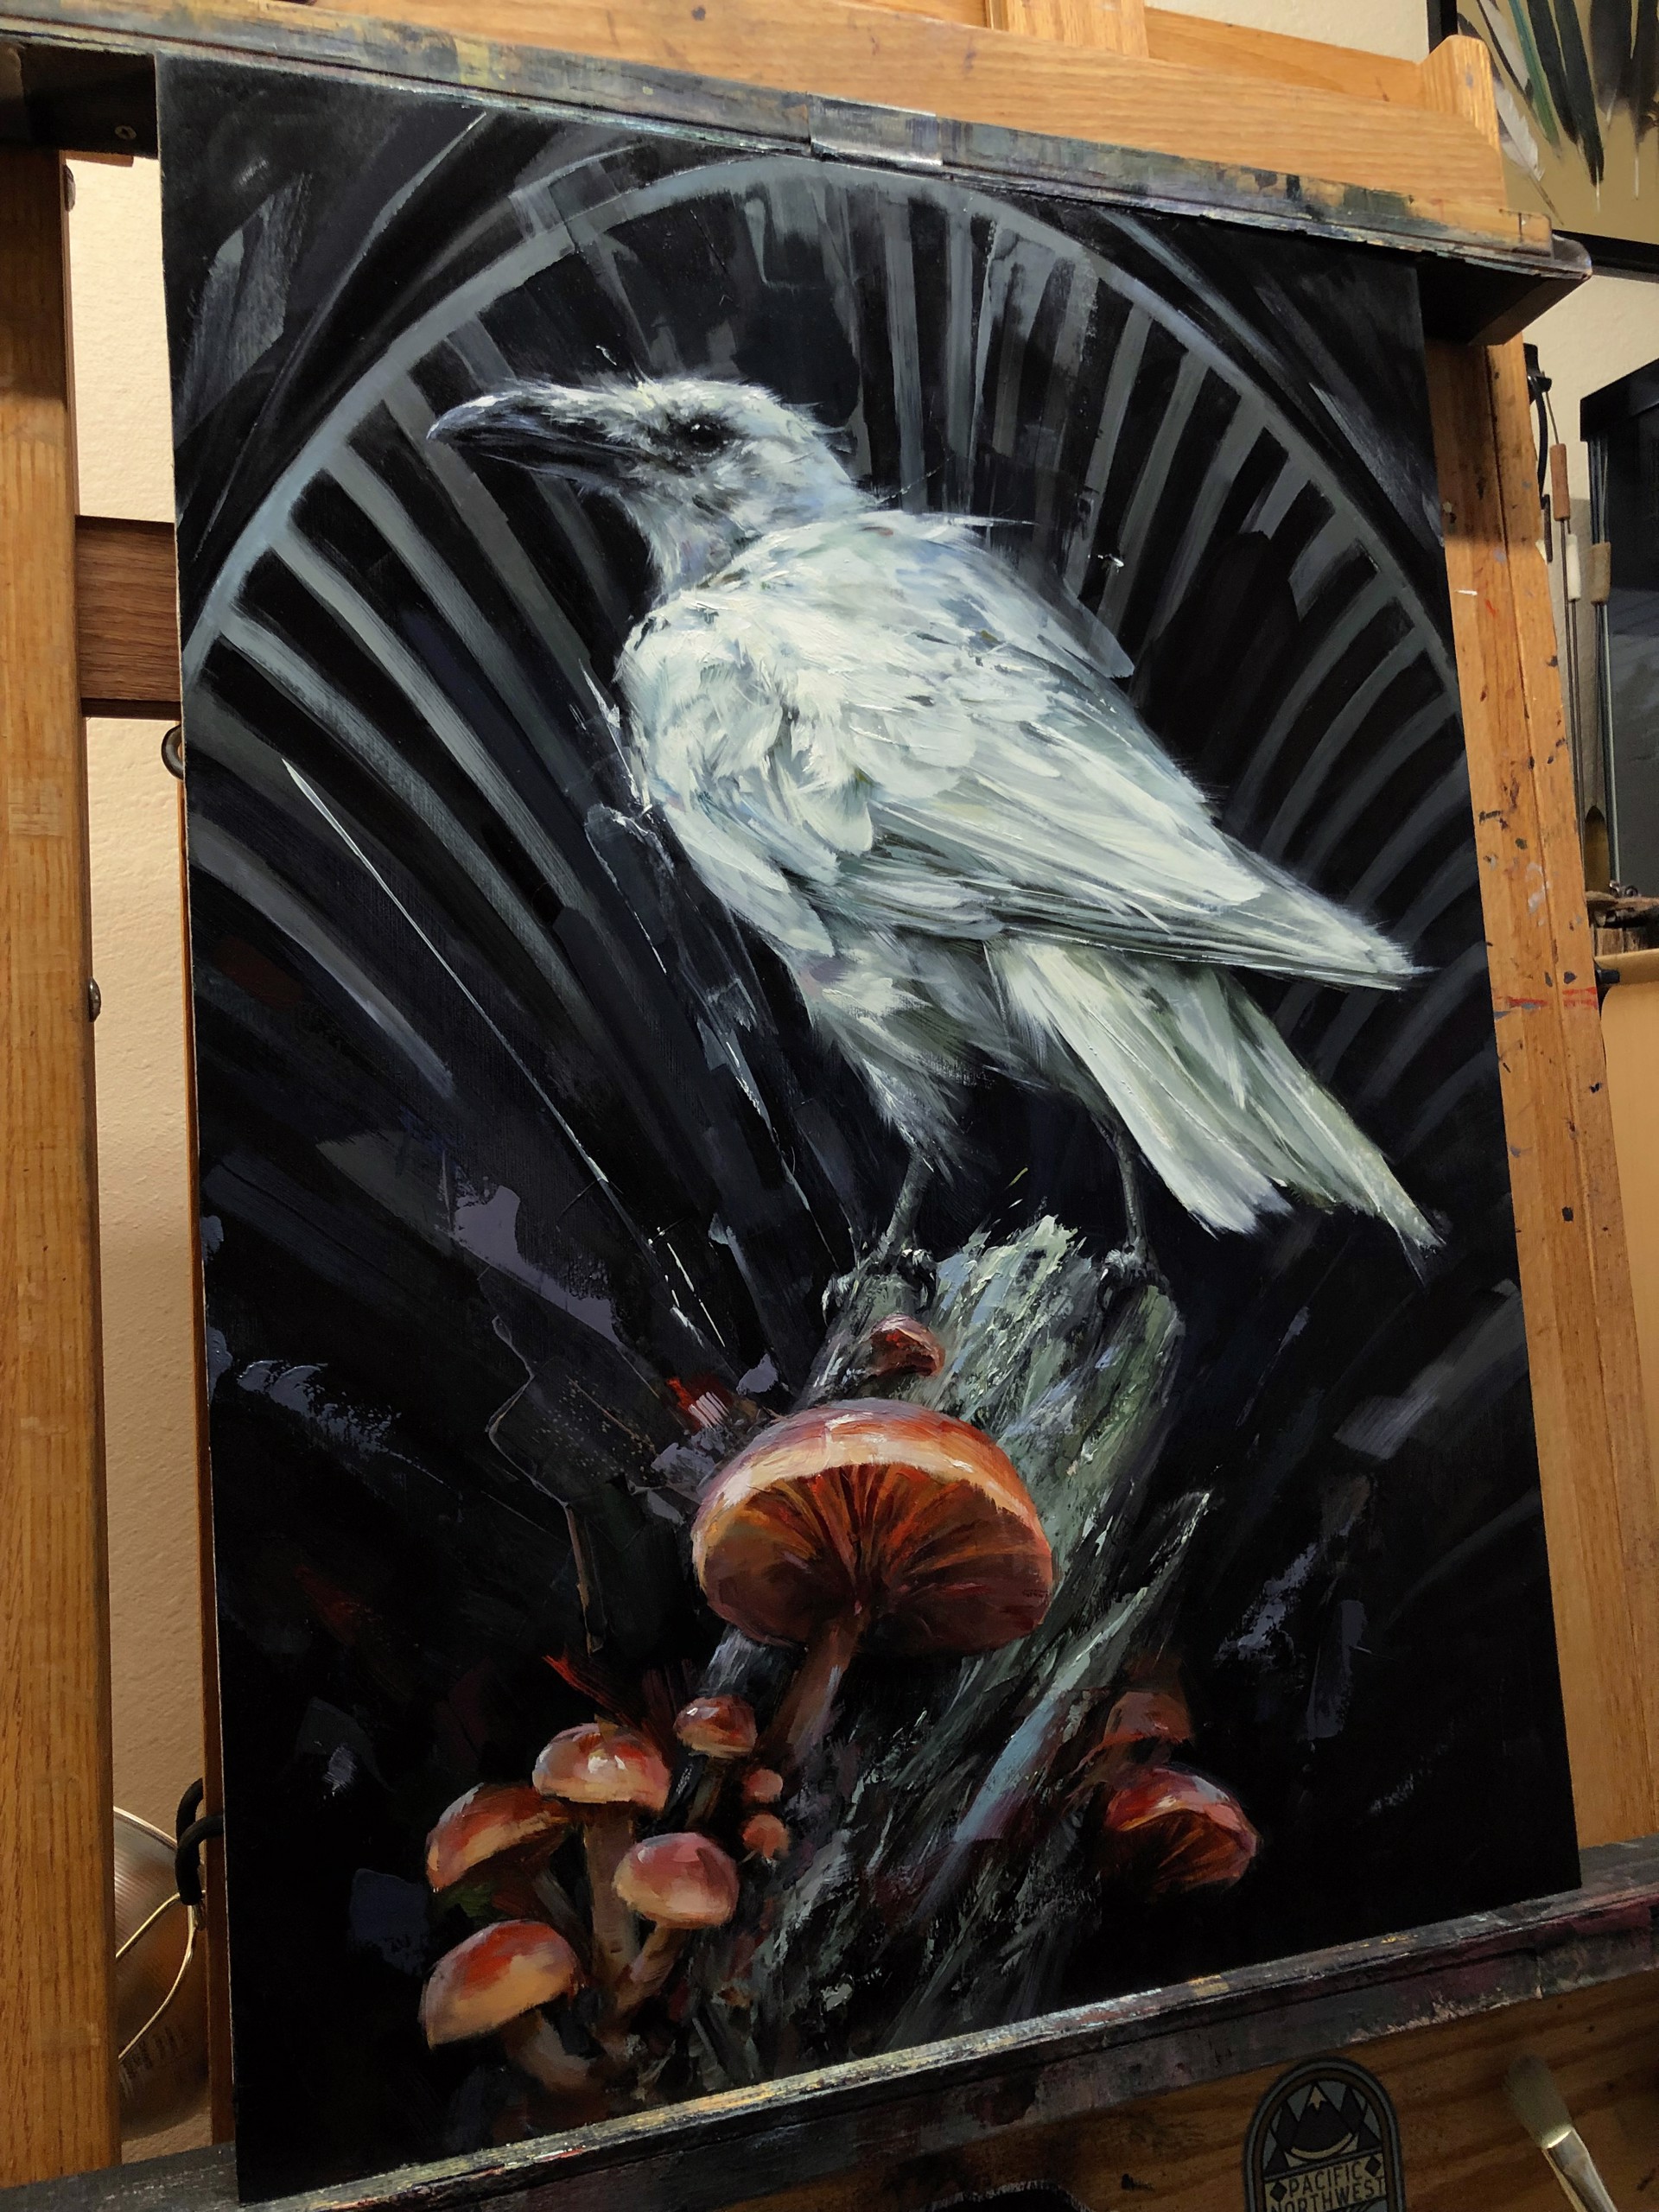 The White Raven by Lindsey Kustusch